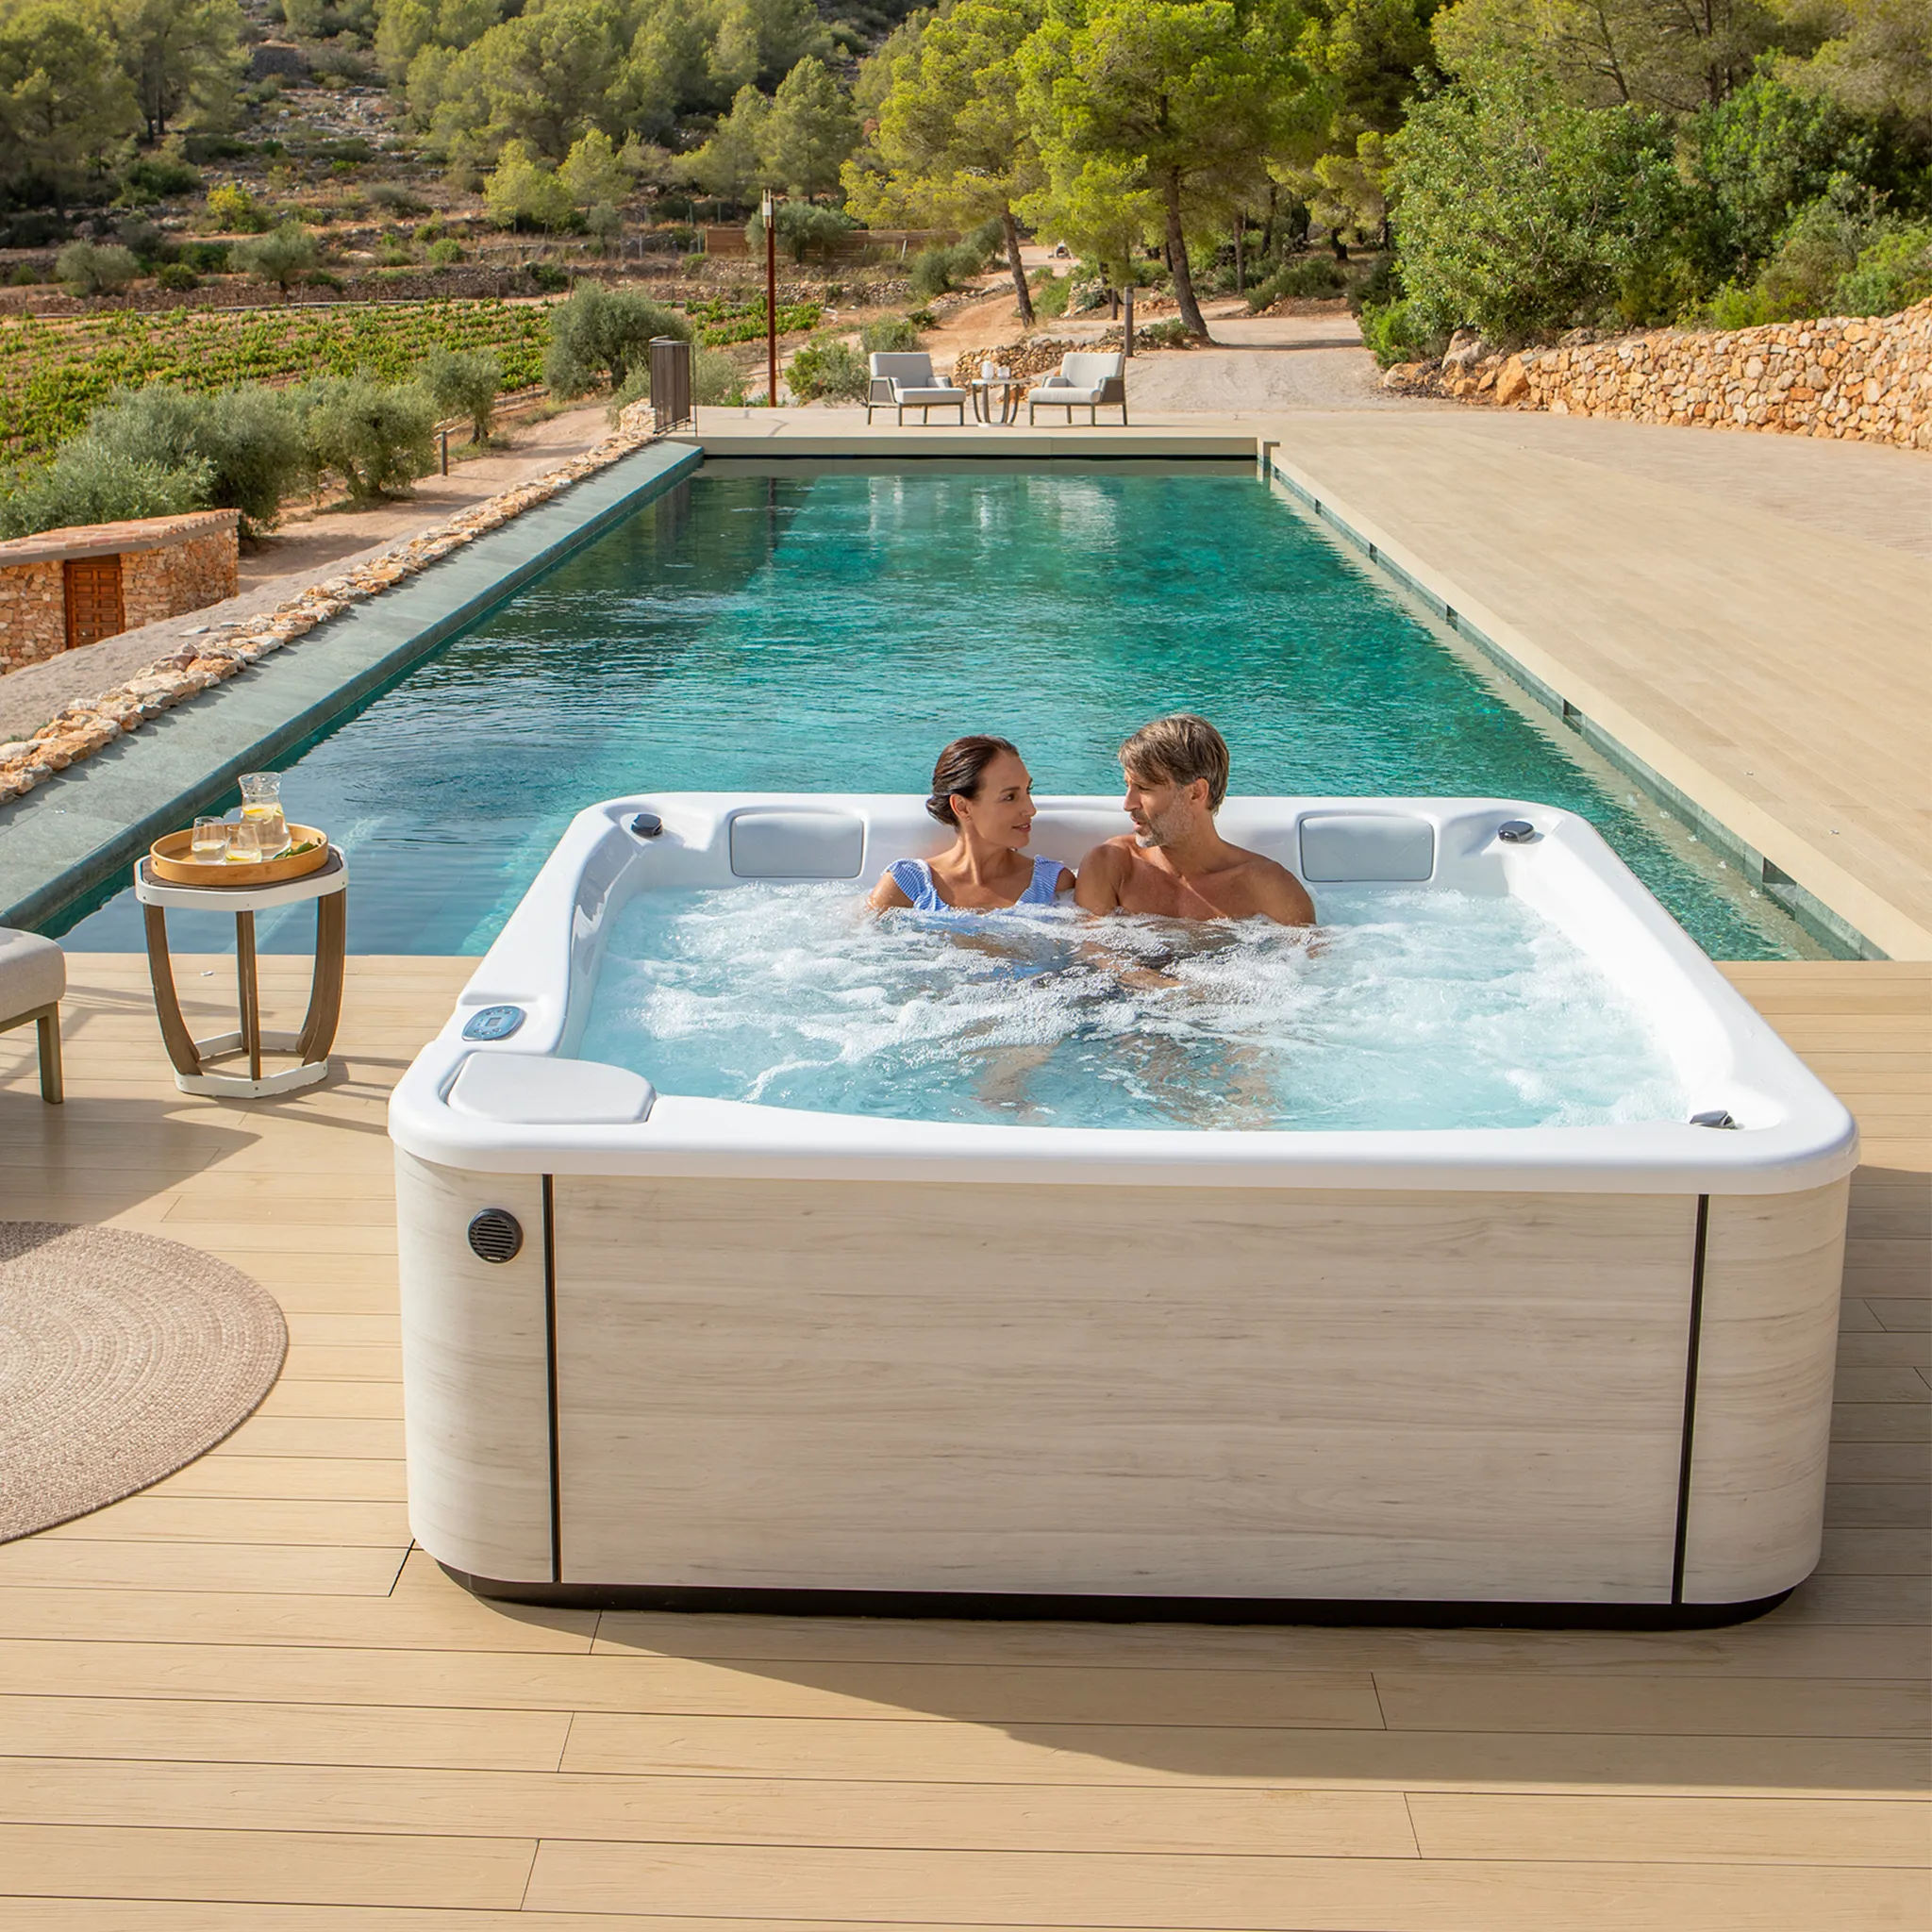 outdoor spa with a couple relaxing in the outdoor jacuzzi